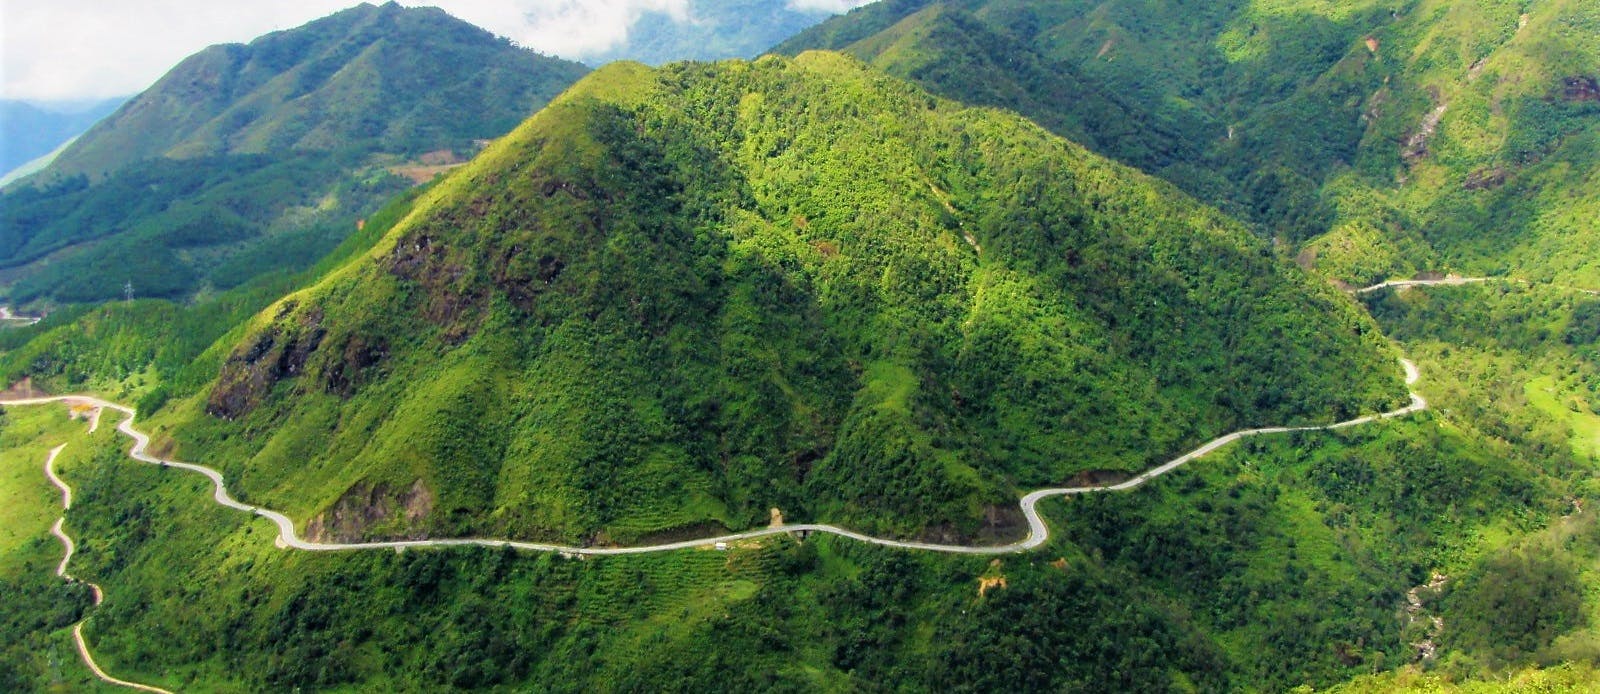 25 of the Greatest Riding Roads in Vietnam